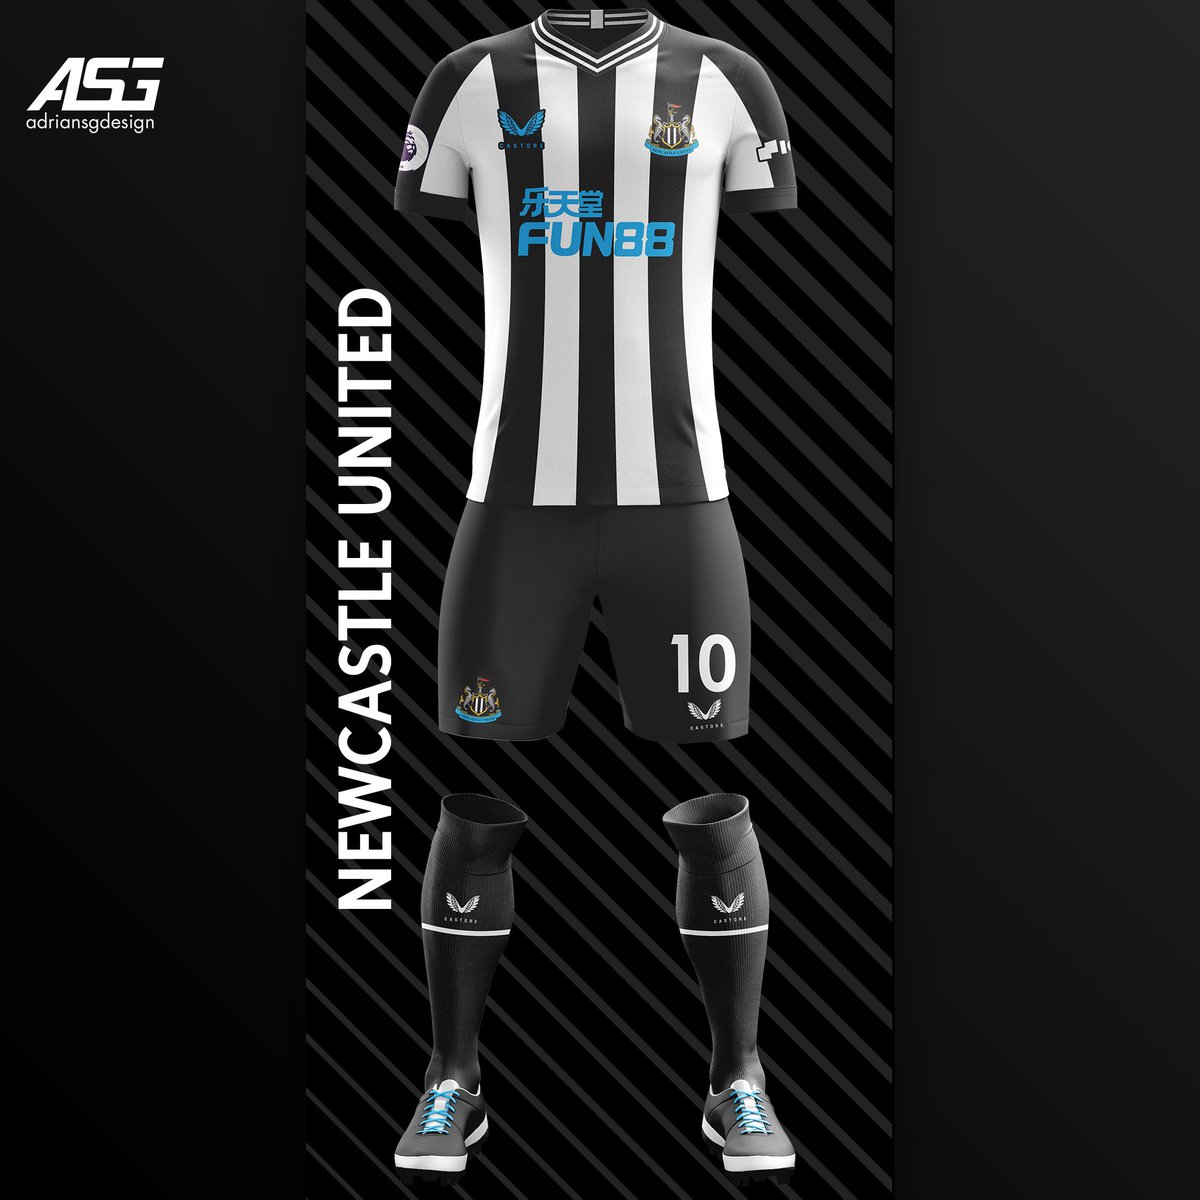 Newcastle United  @NUFC Their first season with Castore kits. White base with three black stripes. Blue sponsors from the Fun88 sponsor too.